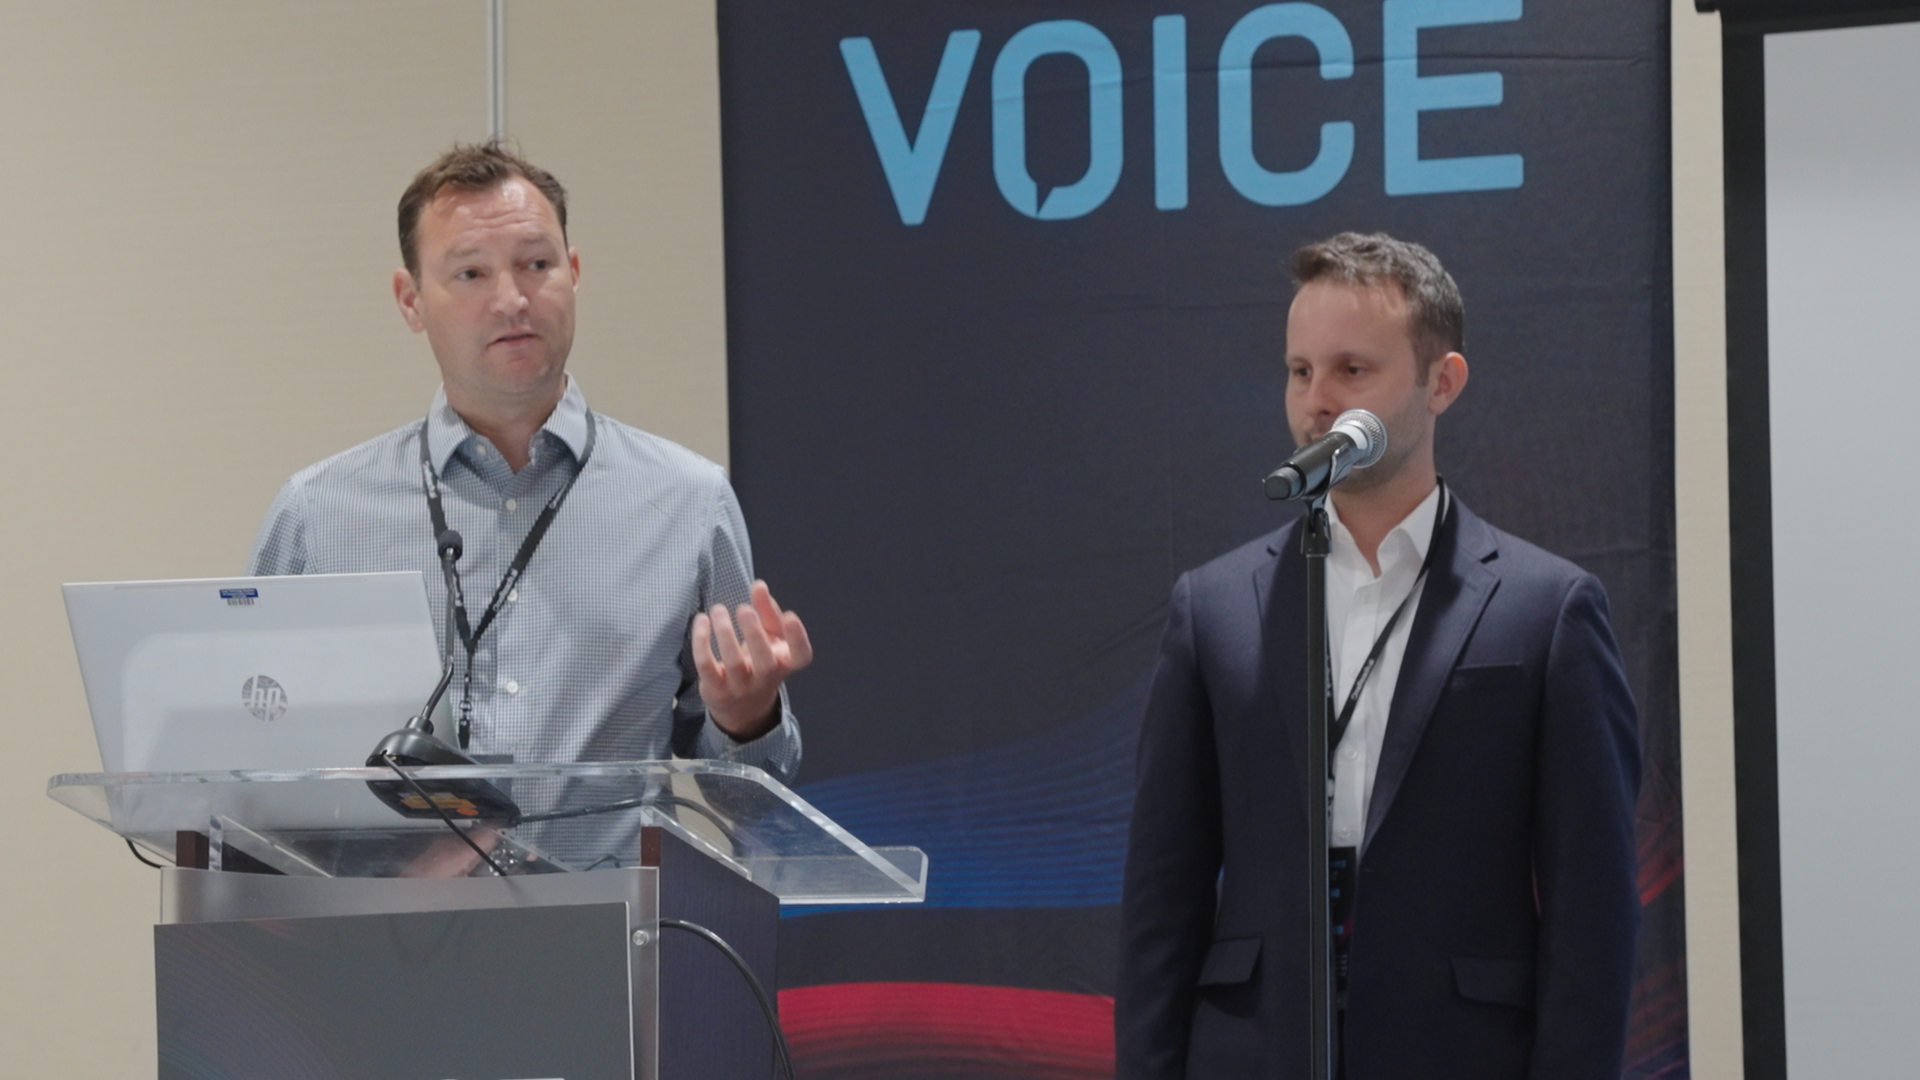 VOICE22 | In-Car Voice Marketing: A Burgeoning New Ad Marketplace | Stas Tushinskiy & Johan Wouters